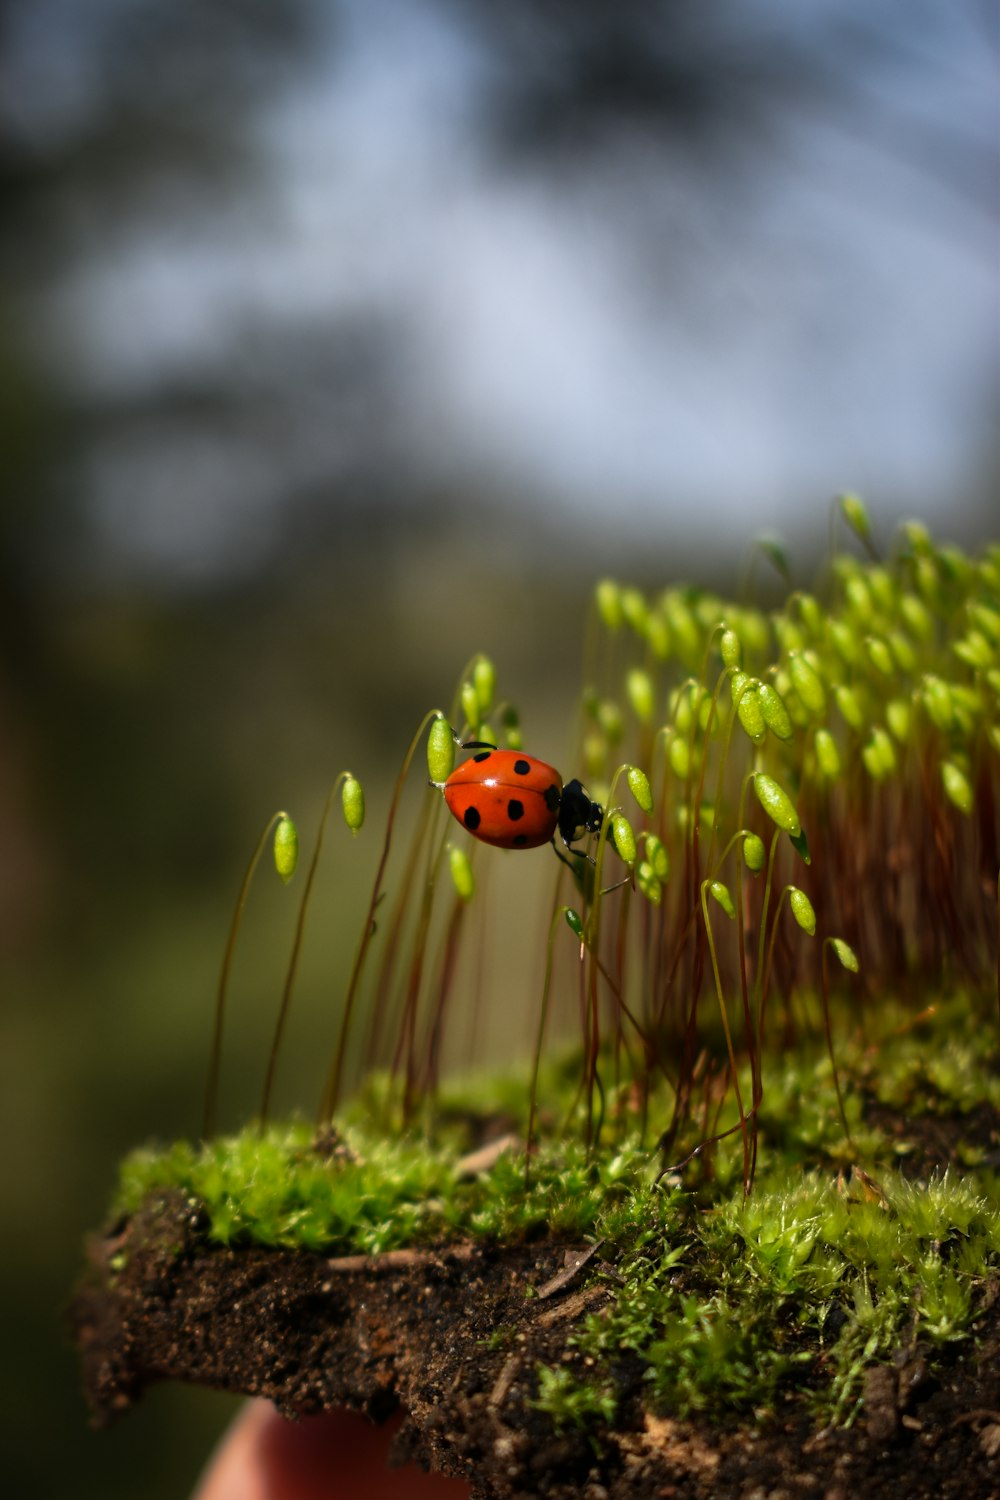 red ladybug perched on green plant in close up photography during daytime